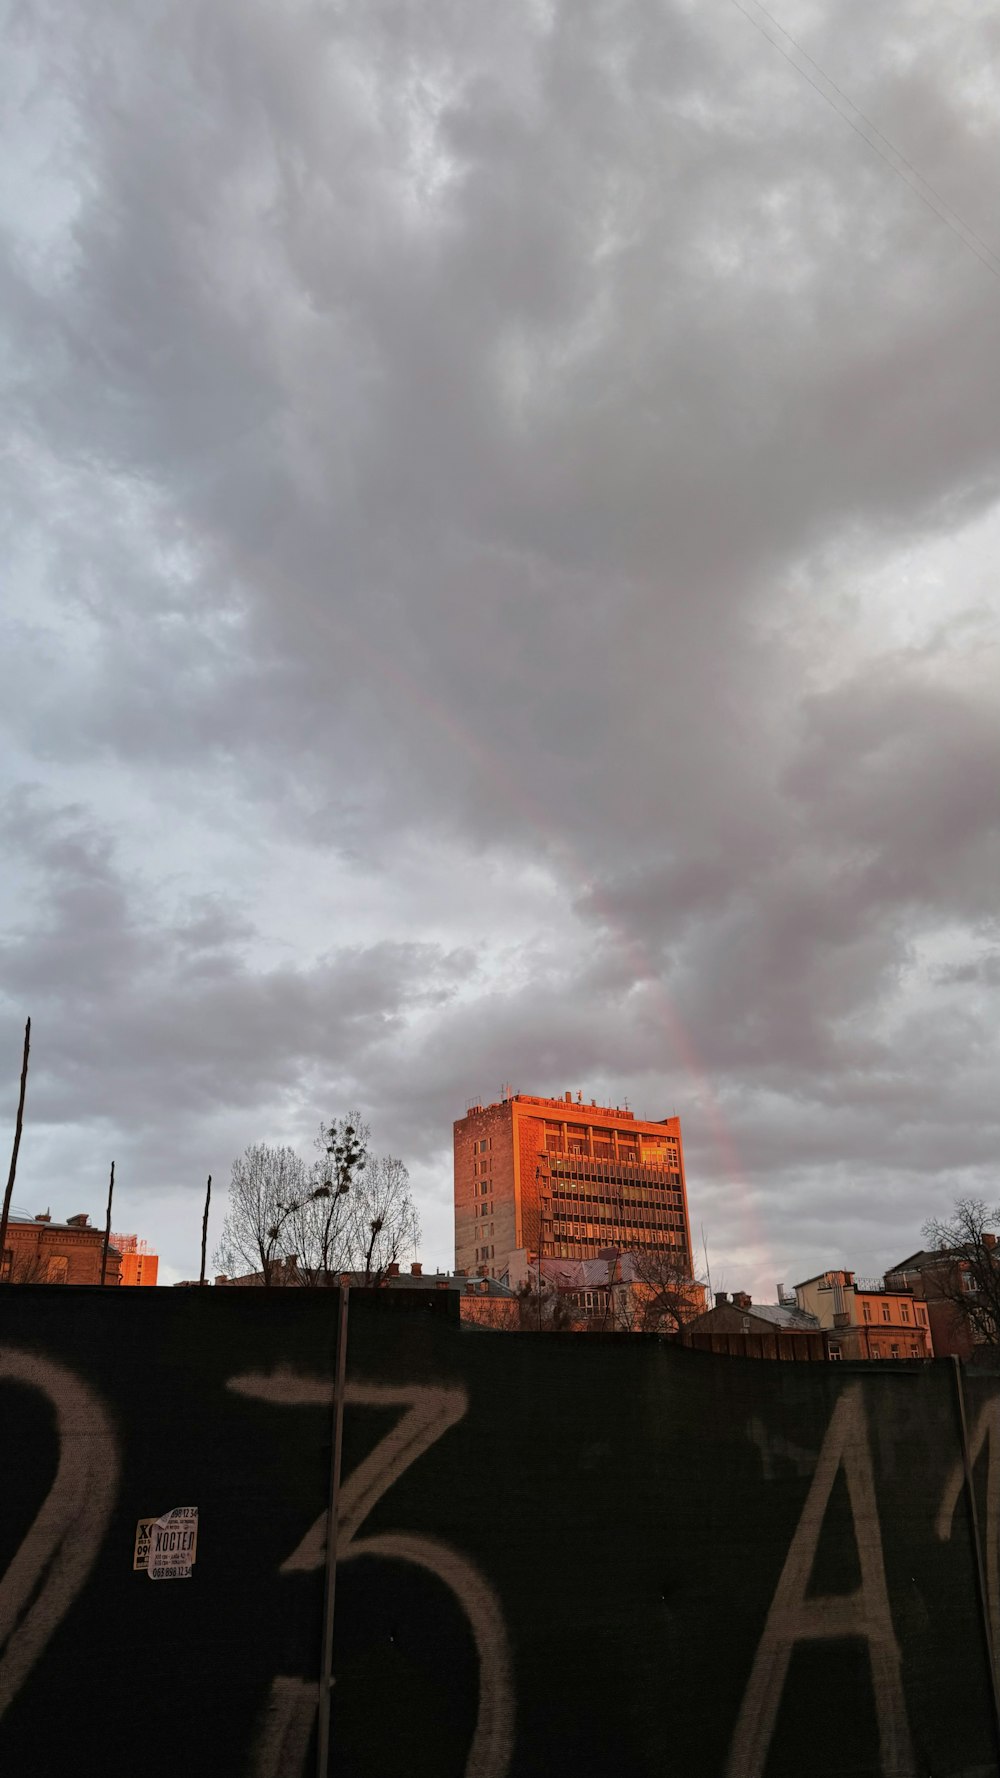 a rainbow appears in the sky over a city